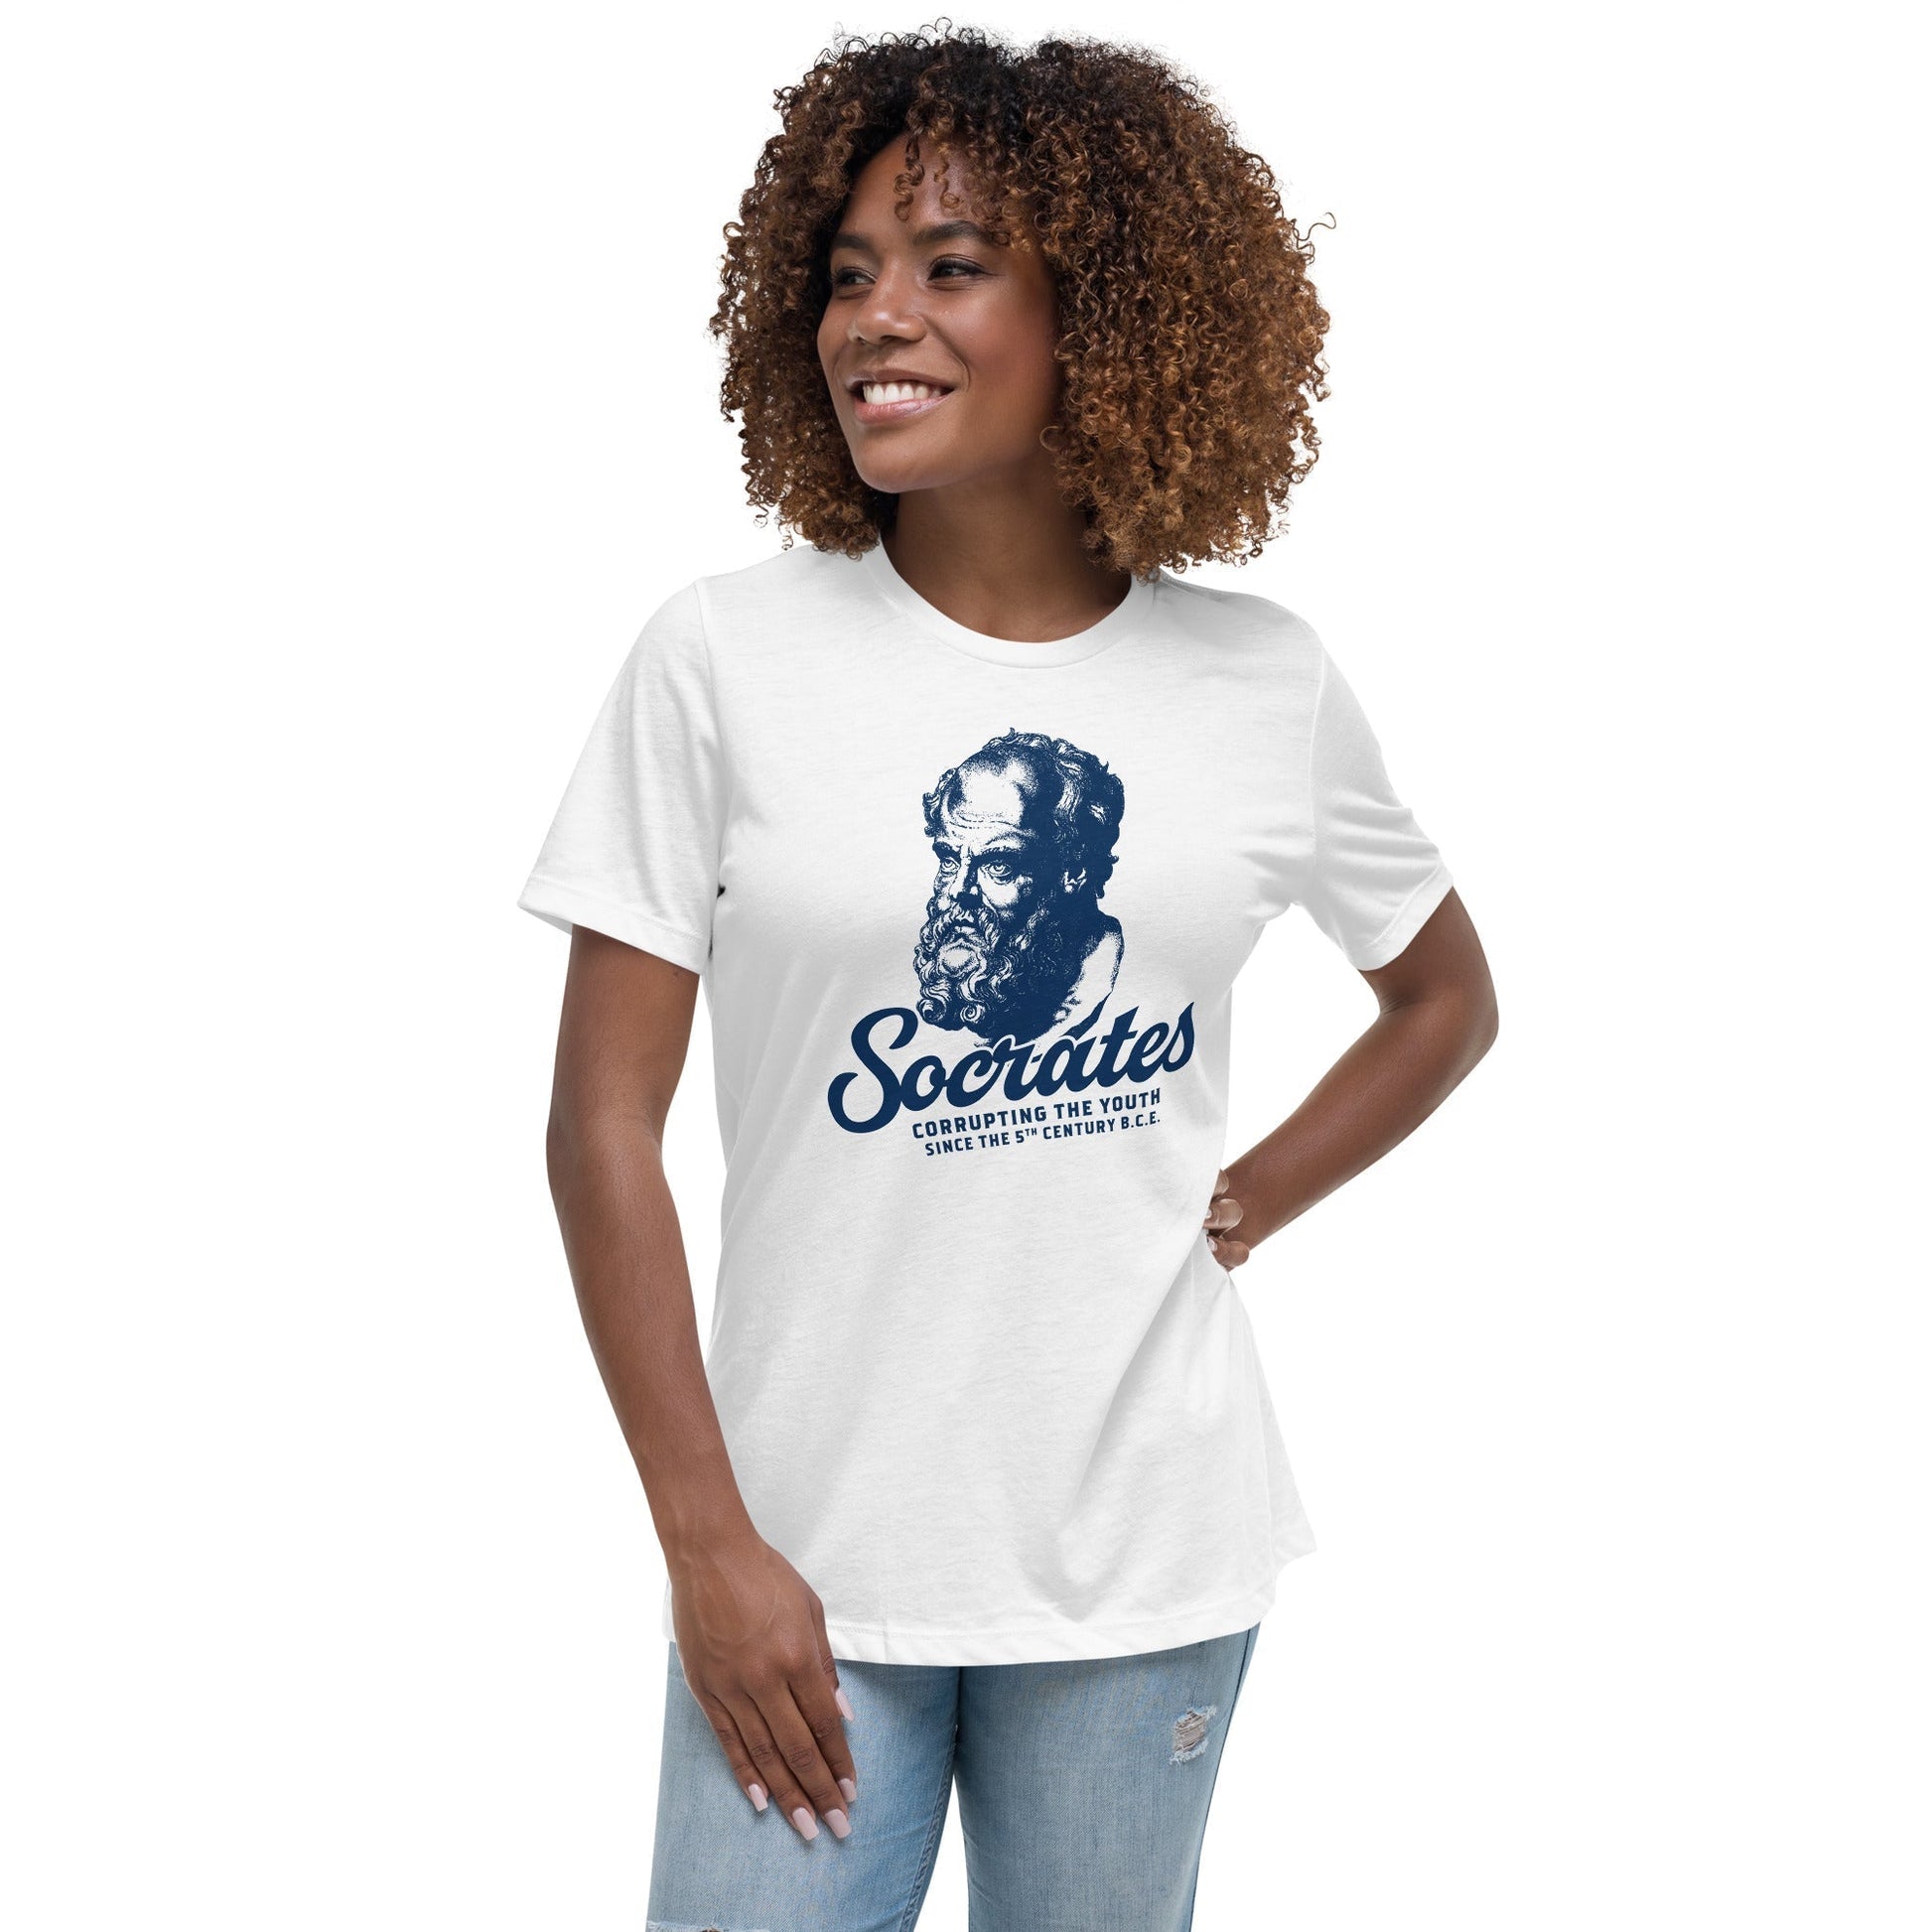 Socrates - Corrupting the youth - Women's T-Shirt